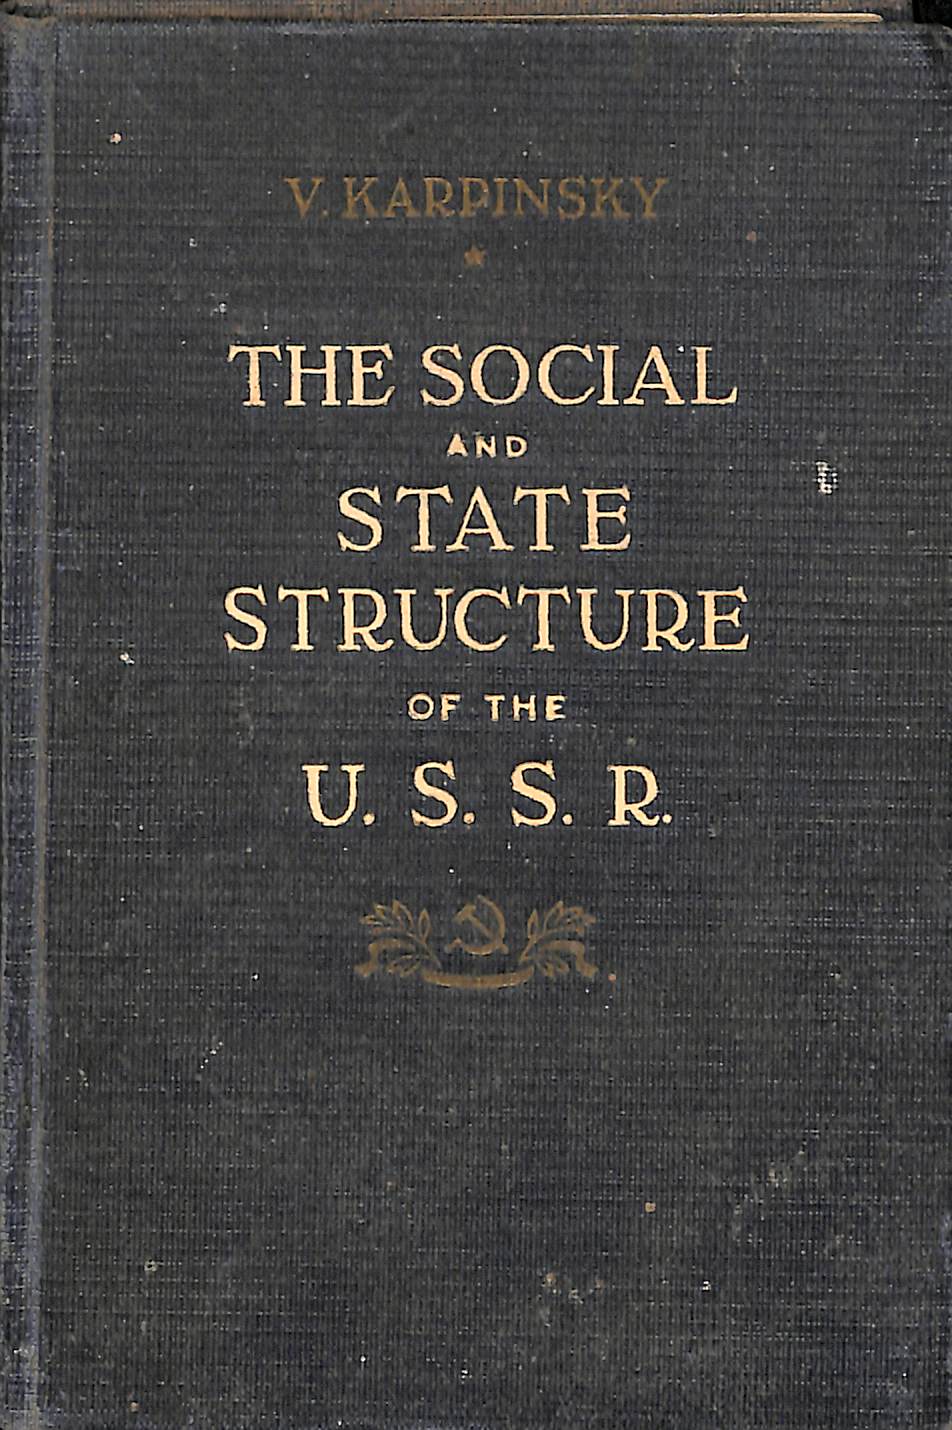 The social & state structure of the (U.S.SR)